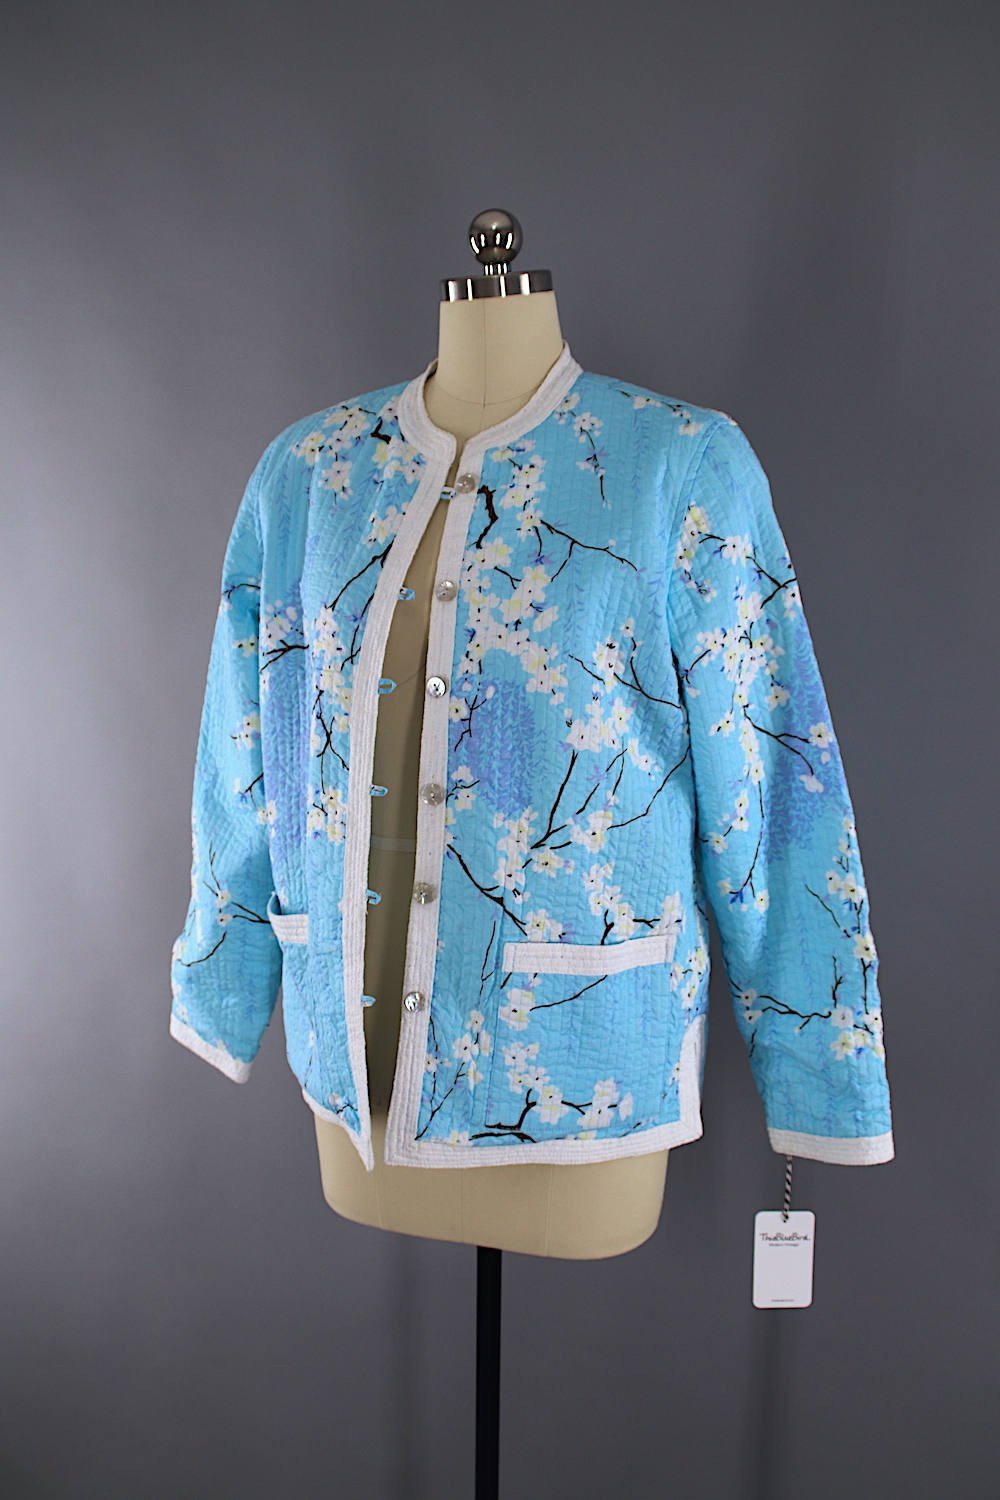 Vintage 1980s Cotton Kantha Quilted Jacket / Reversible Blue Cherry Blossom / White Eyelet - ThisBlueBird